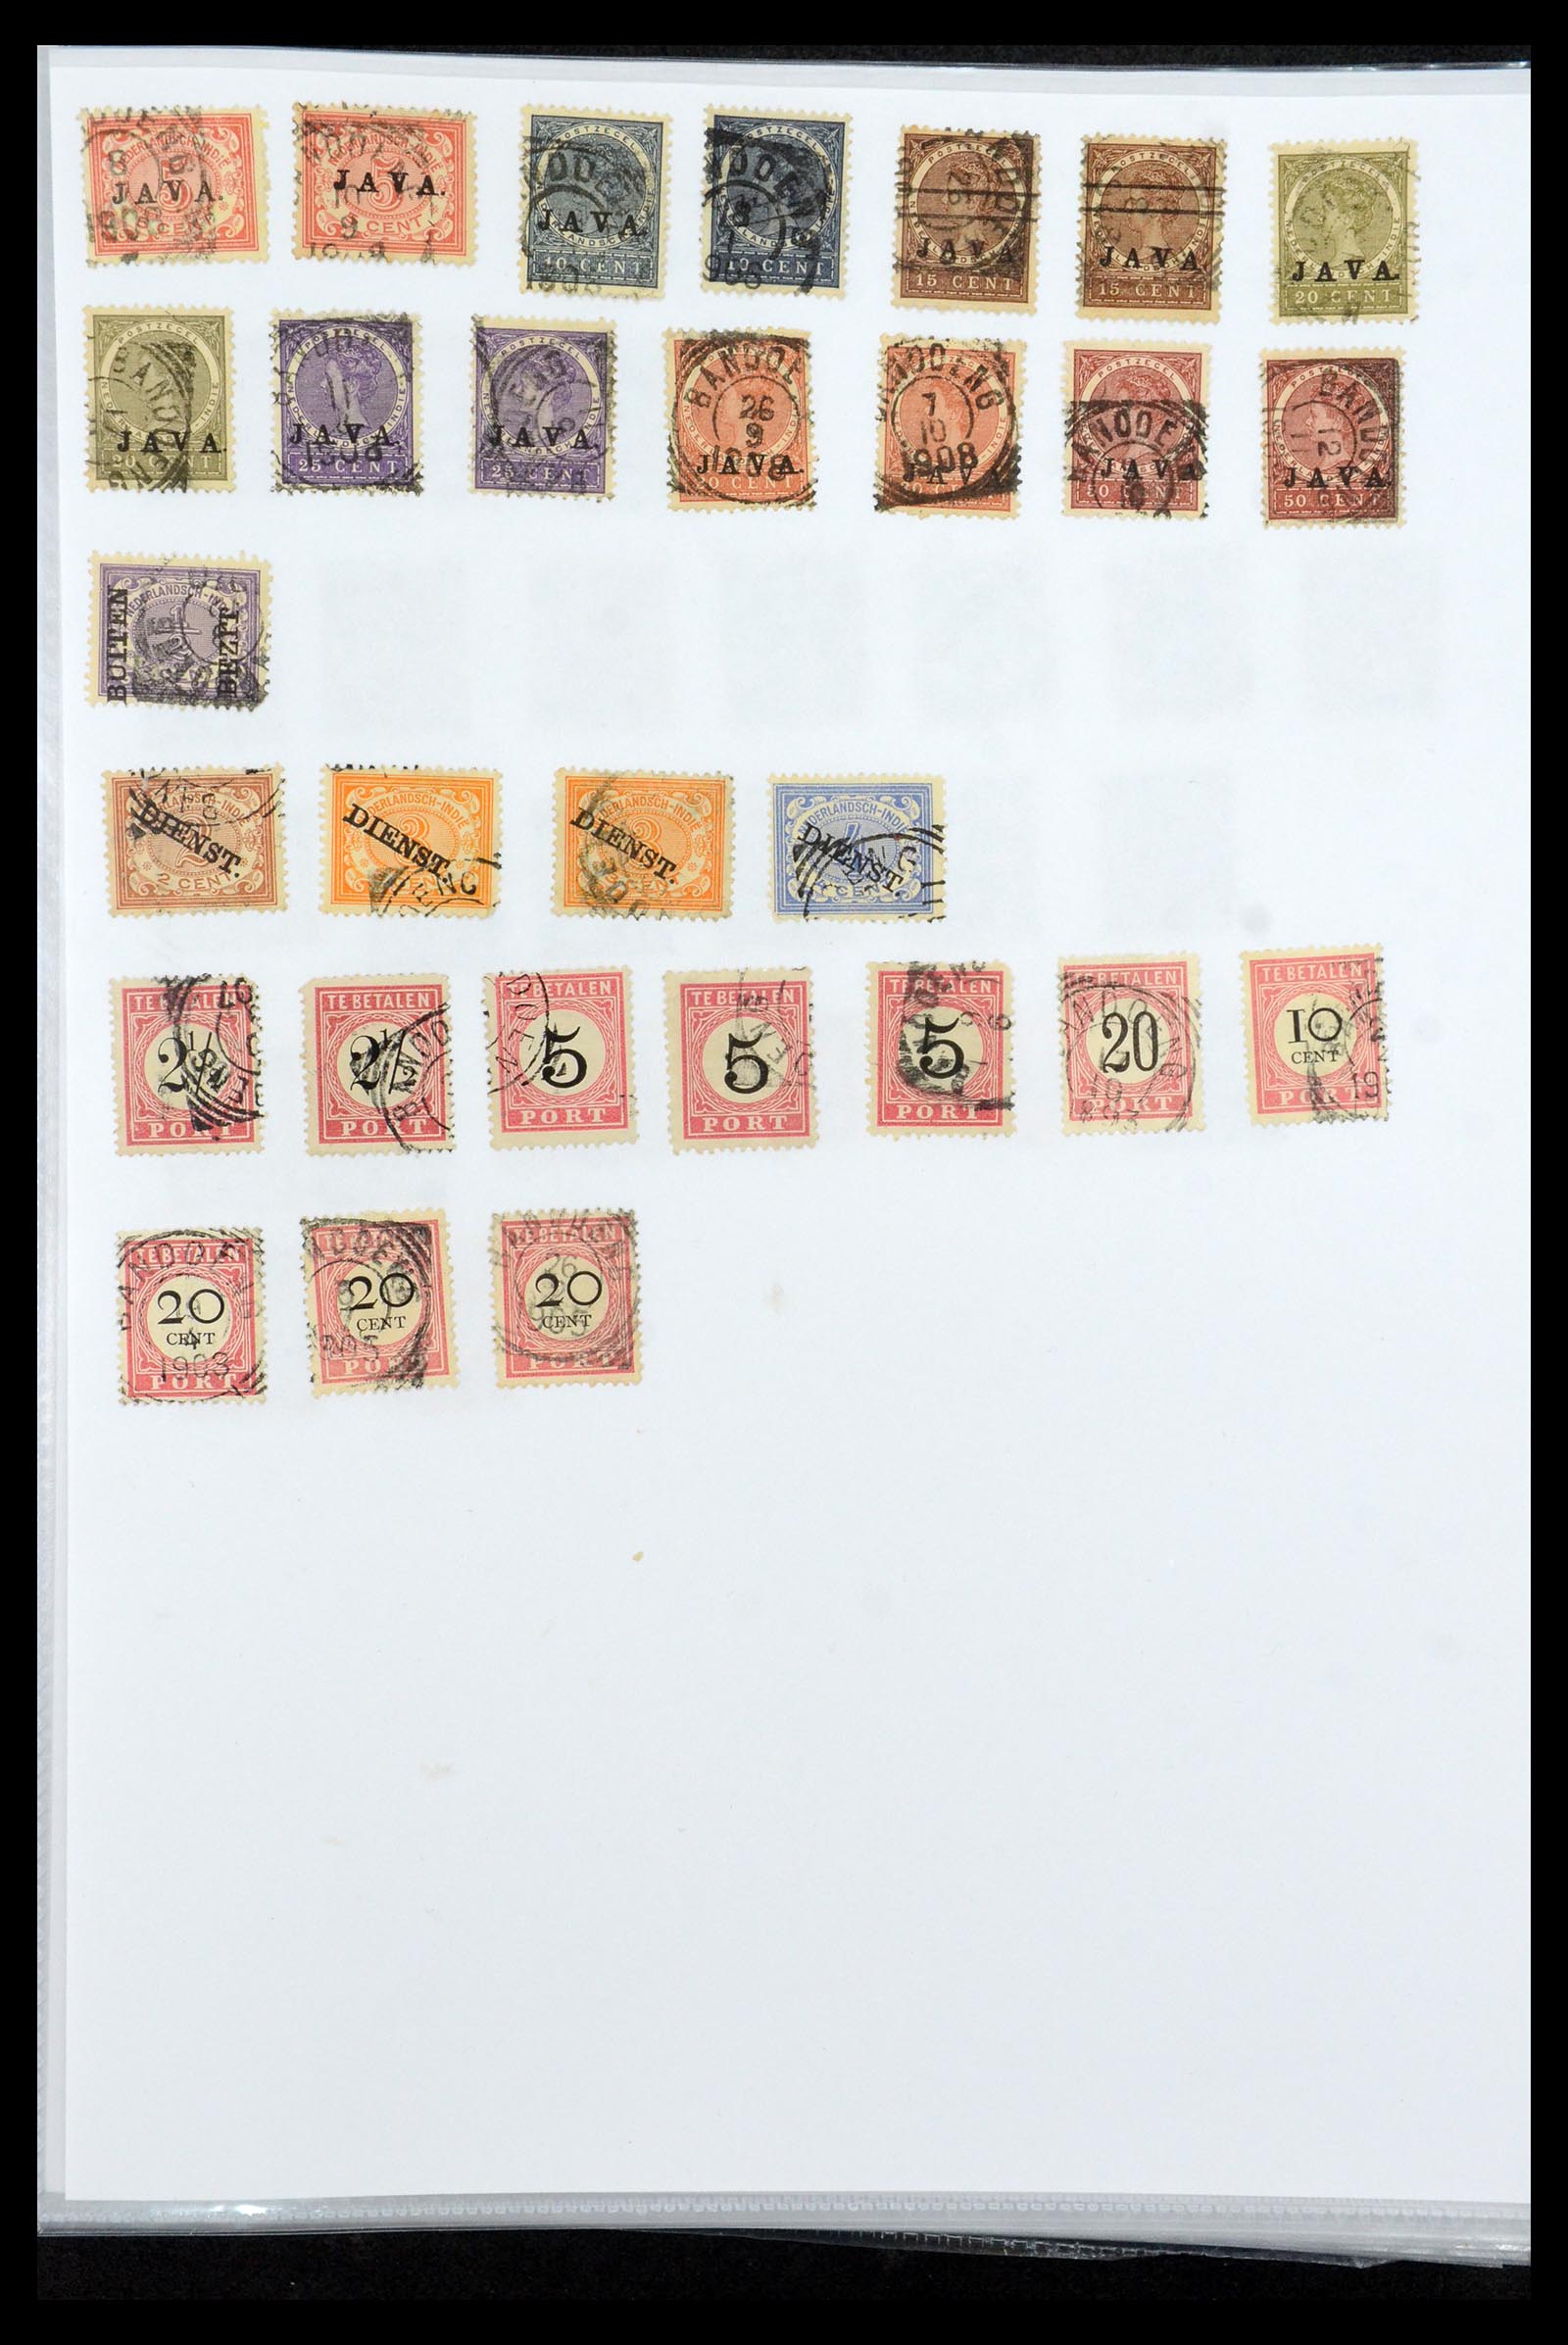 36432 015 - Stamp collection 36432 Dutch east Indies square cancels.